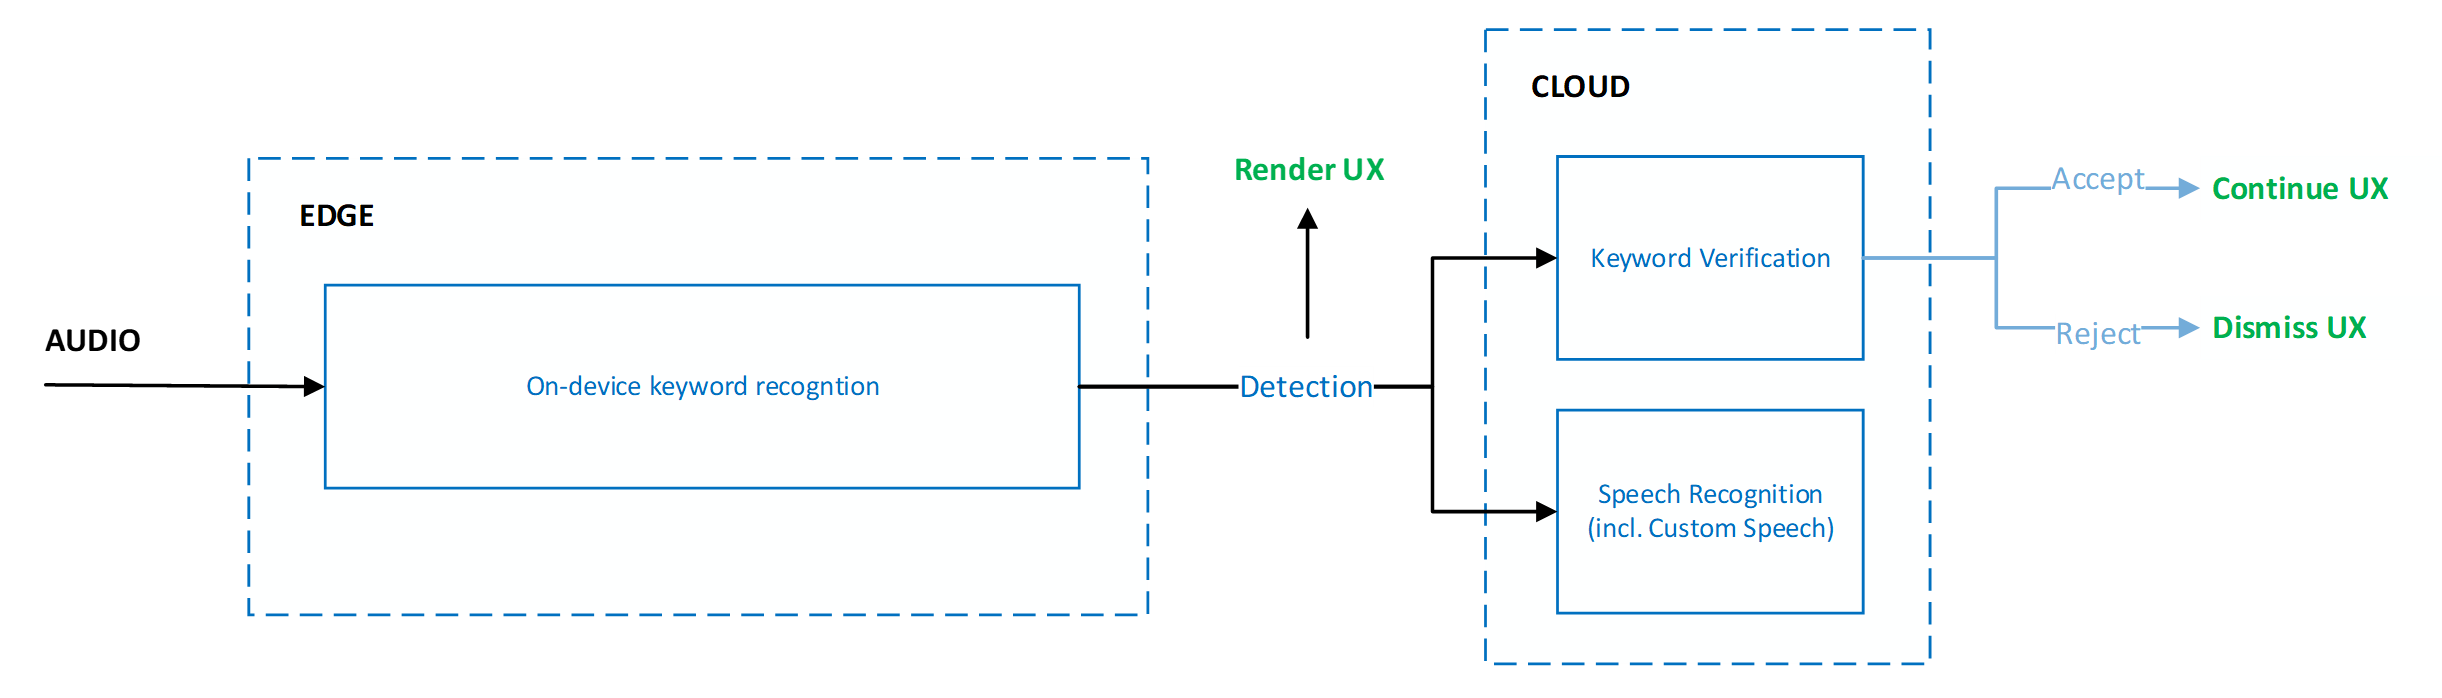 User experience guideline when optimizing for latency.